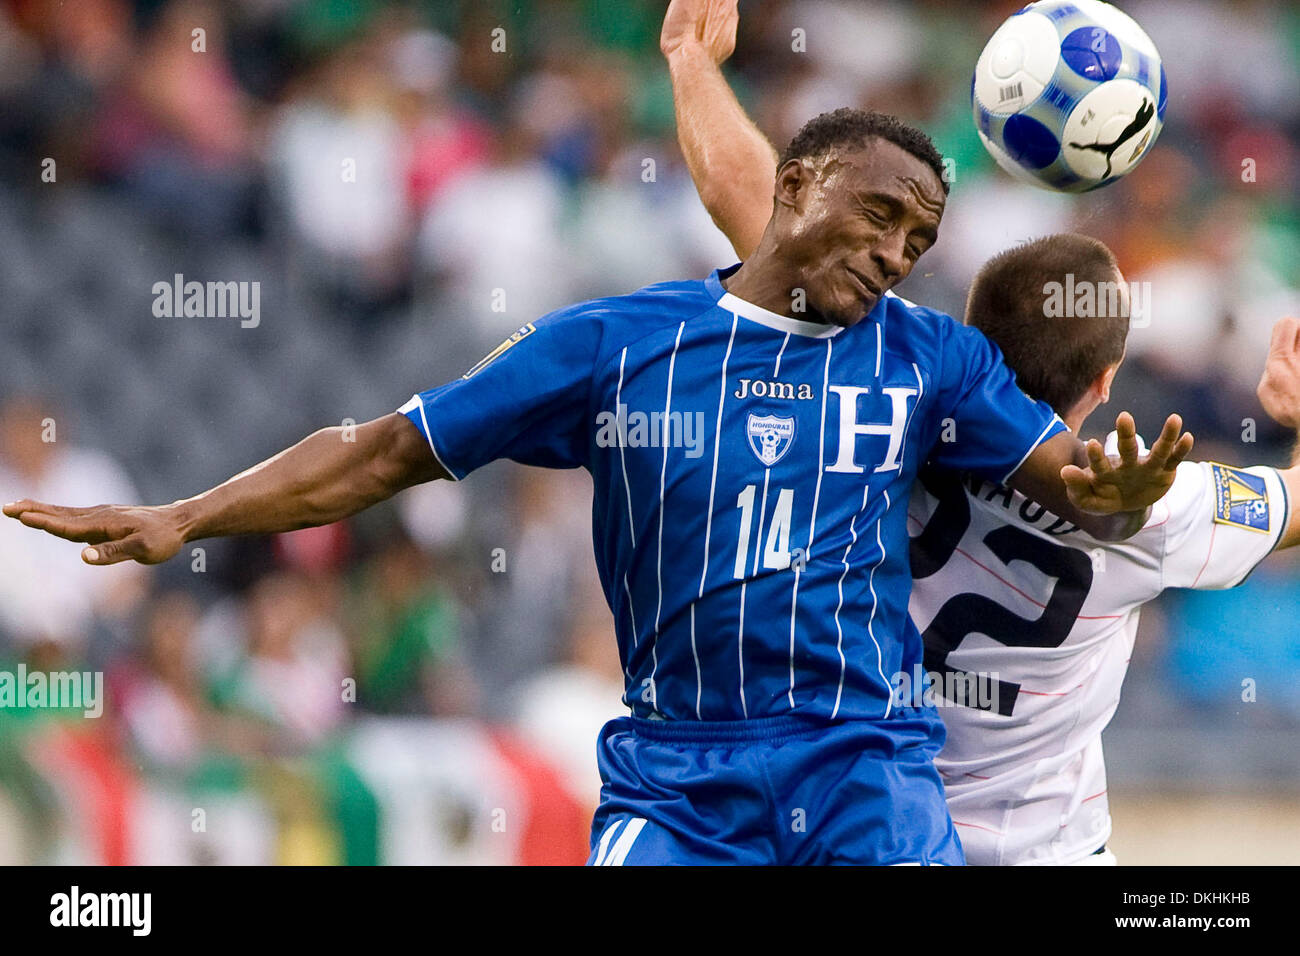 July 23, 2009 - Chicago, Illinois, USA - 23 July 2009:  Honduras' Carlos Palacios gets a header against USA during their semifinal game of the CONCACAF Gold Cup at Soldier Field in Chicago.  USA won 2-0 to advance to the Final. (Credit Image: © Southcreek Global/ZUMApress.com) Stock Photo